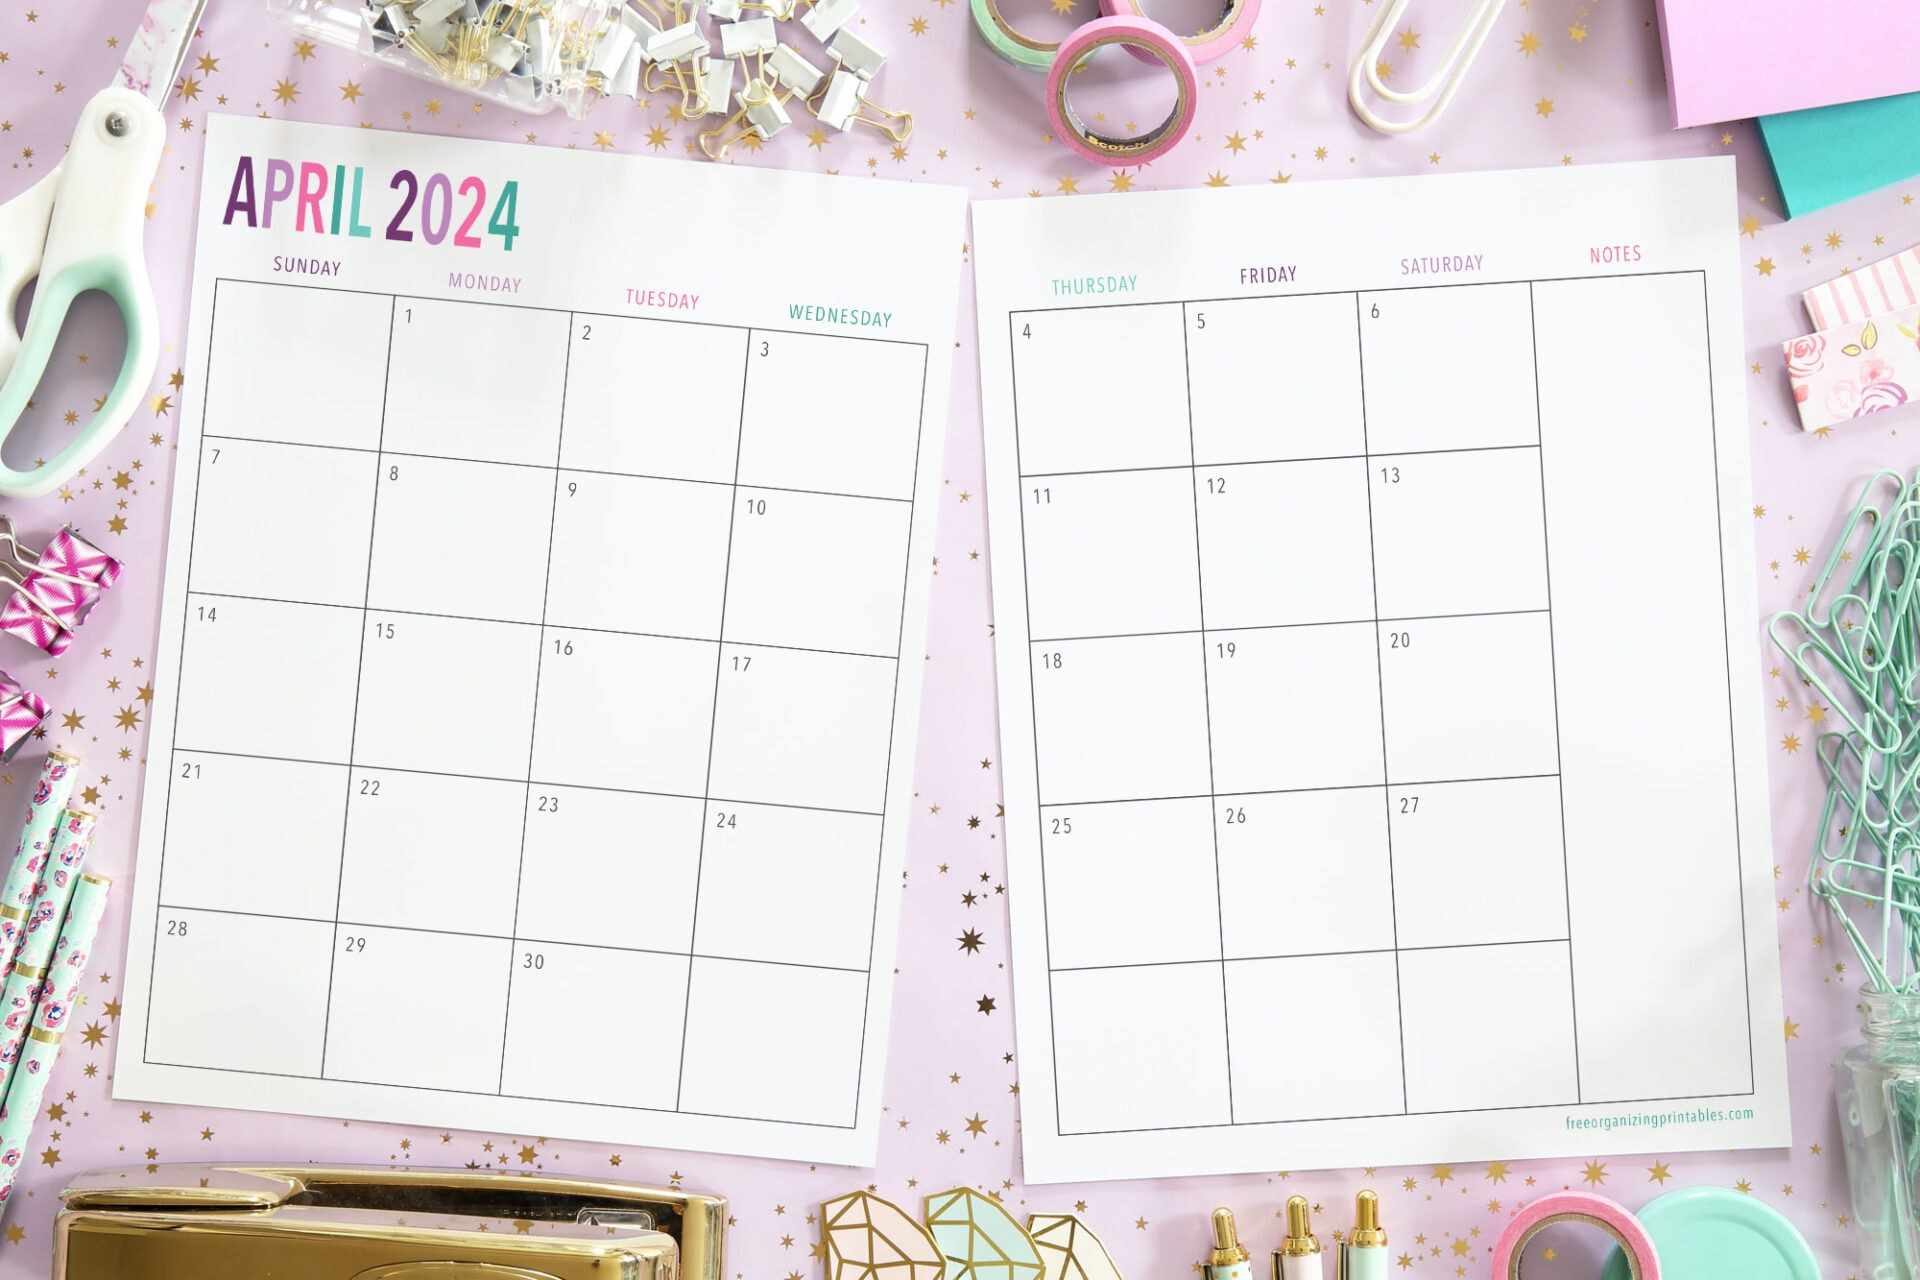 Free Printable 2 Page Blank Monthly Calendar 2024 | Free Printable Calendar 2024 2 Months Per Page